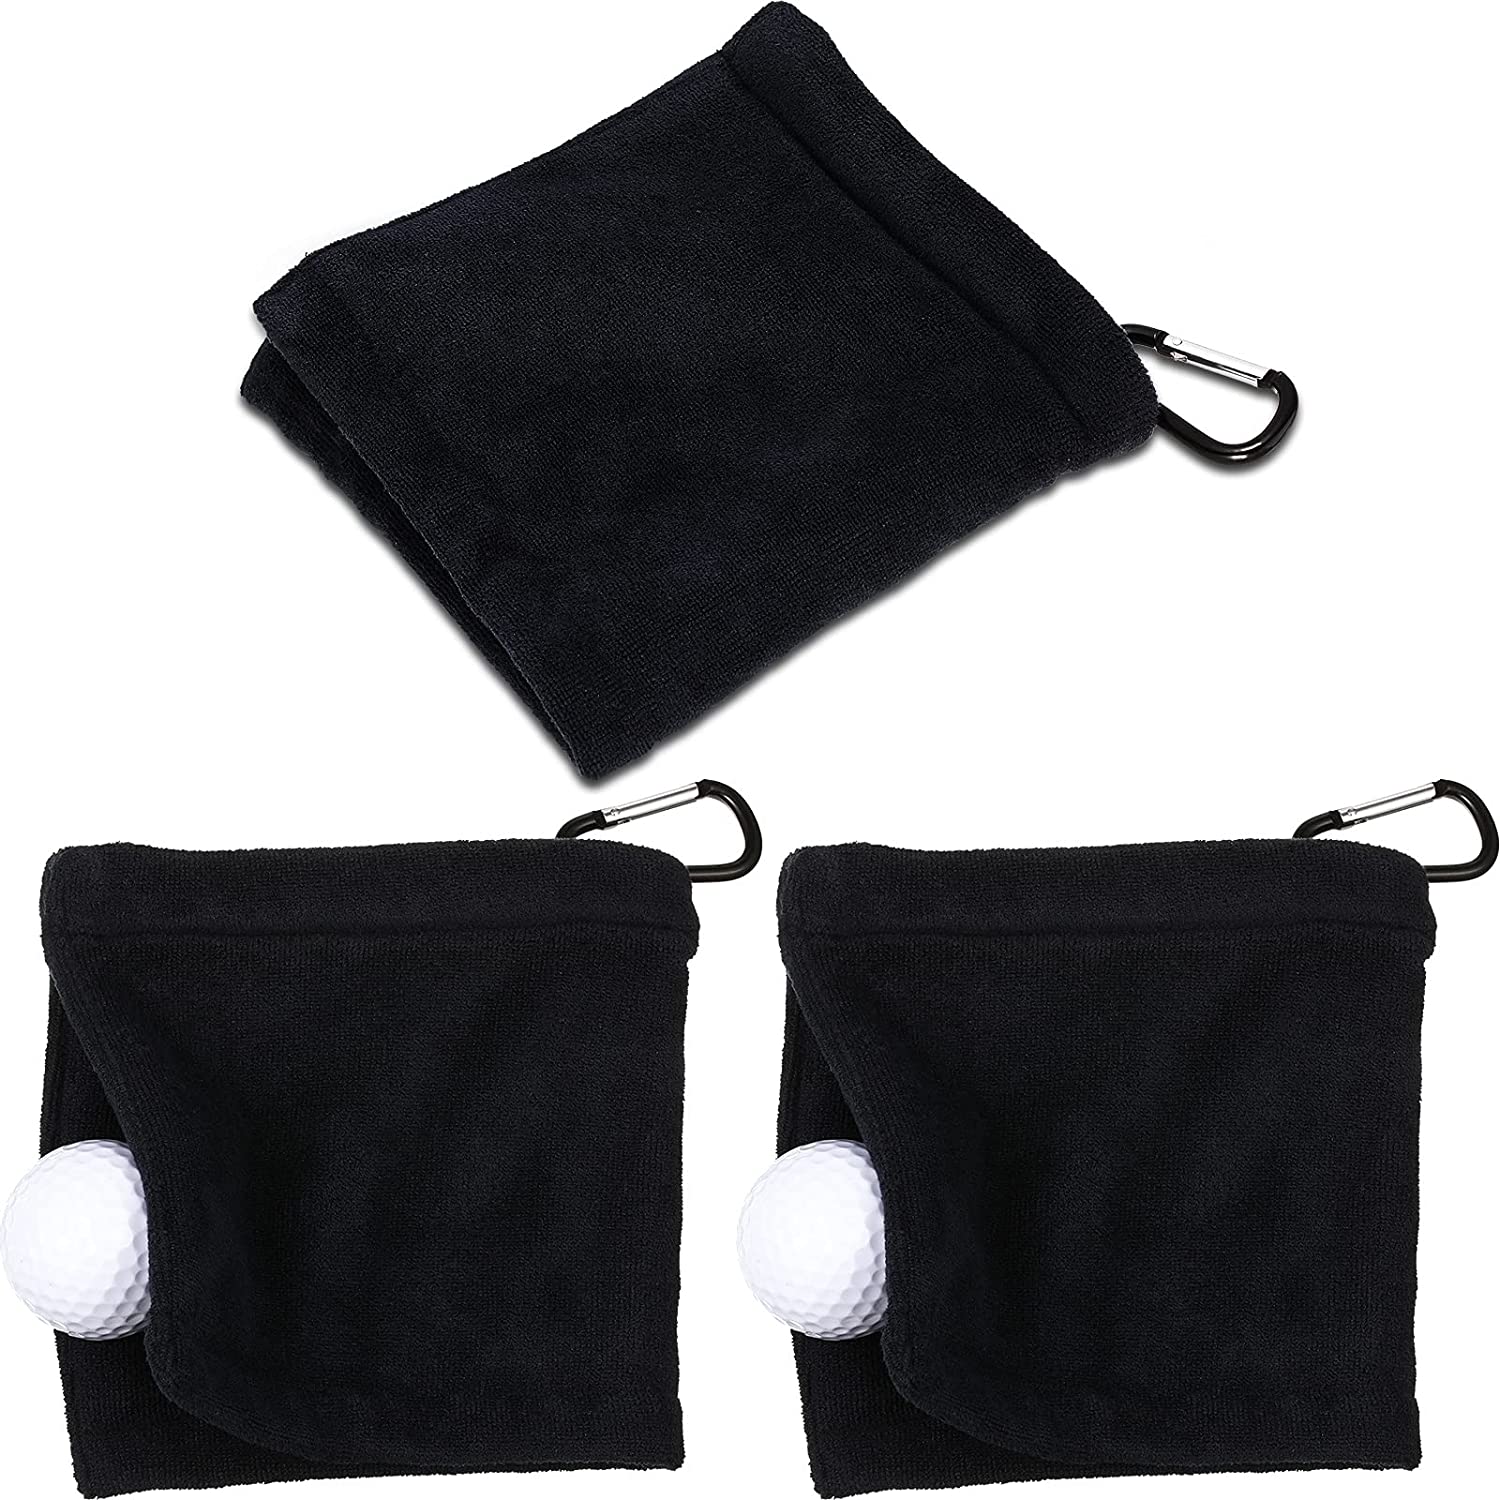 Golf Ball Towel 5.5 x 5.5 Inch Black Golf Wet and Dry Golf Towel Pocket Golf Towel with Clip Ball Towel Golf Ball Towel for Golf Course Exercise Towel (3 Pieces) - image 1 of 7